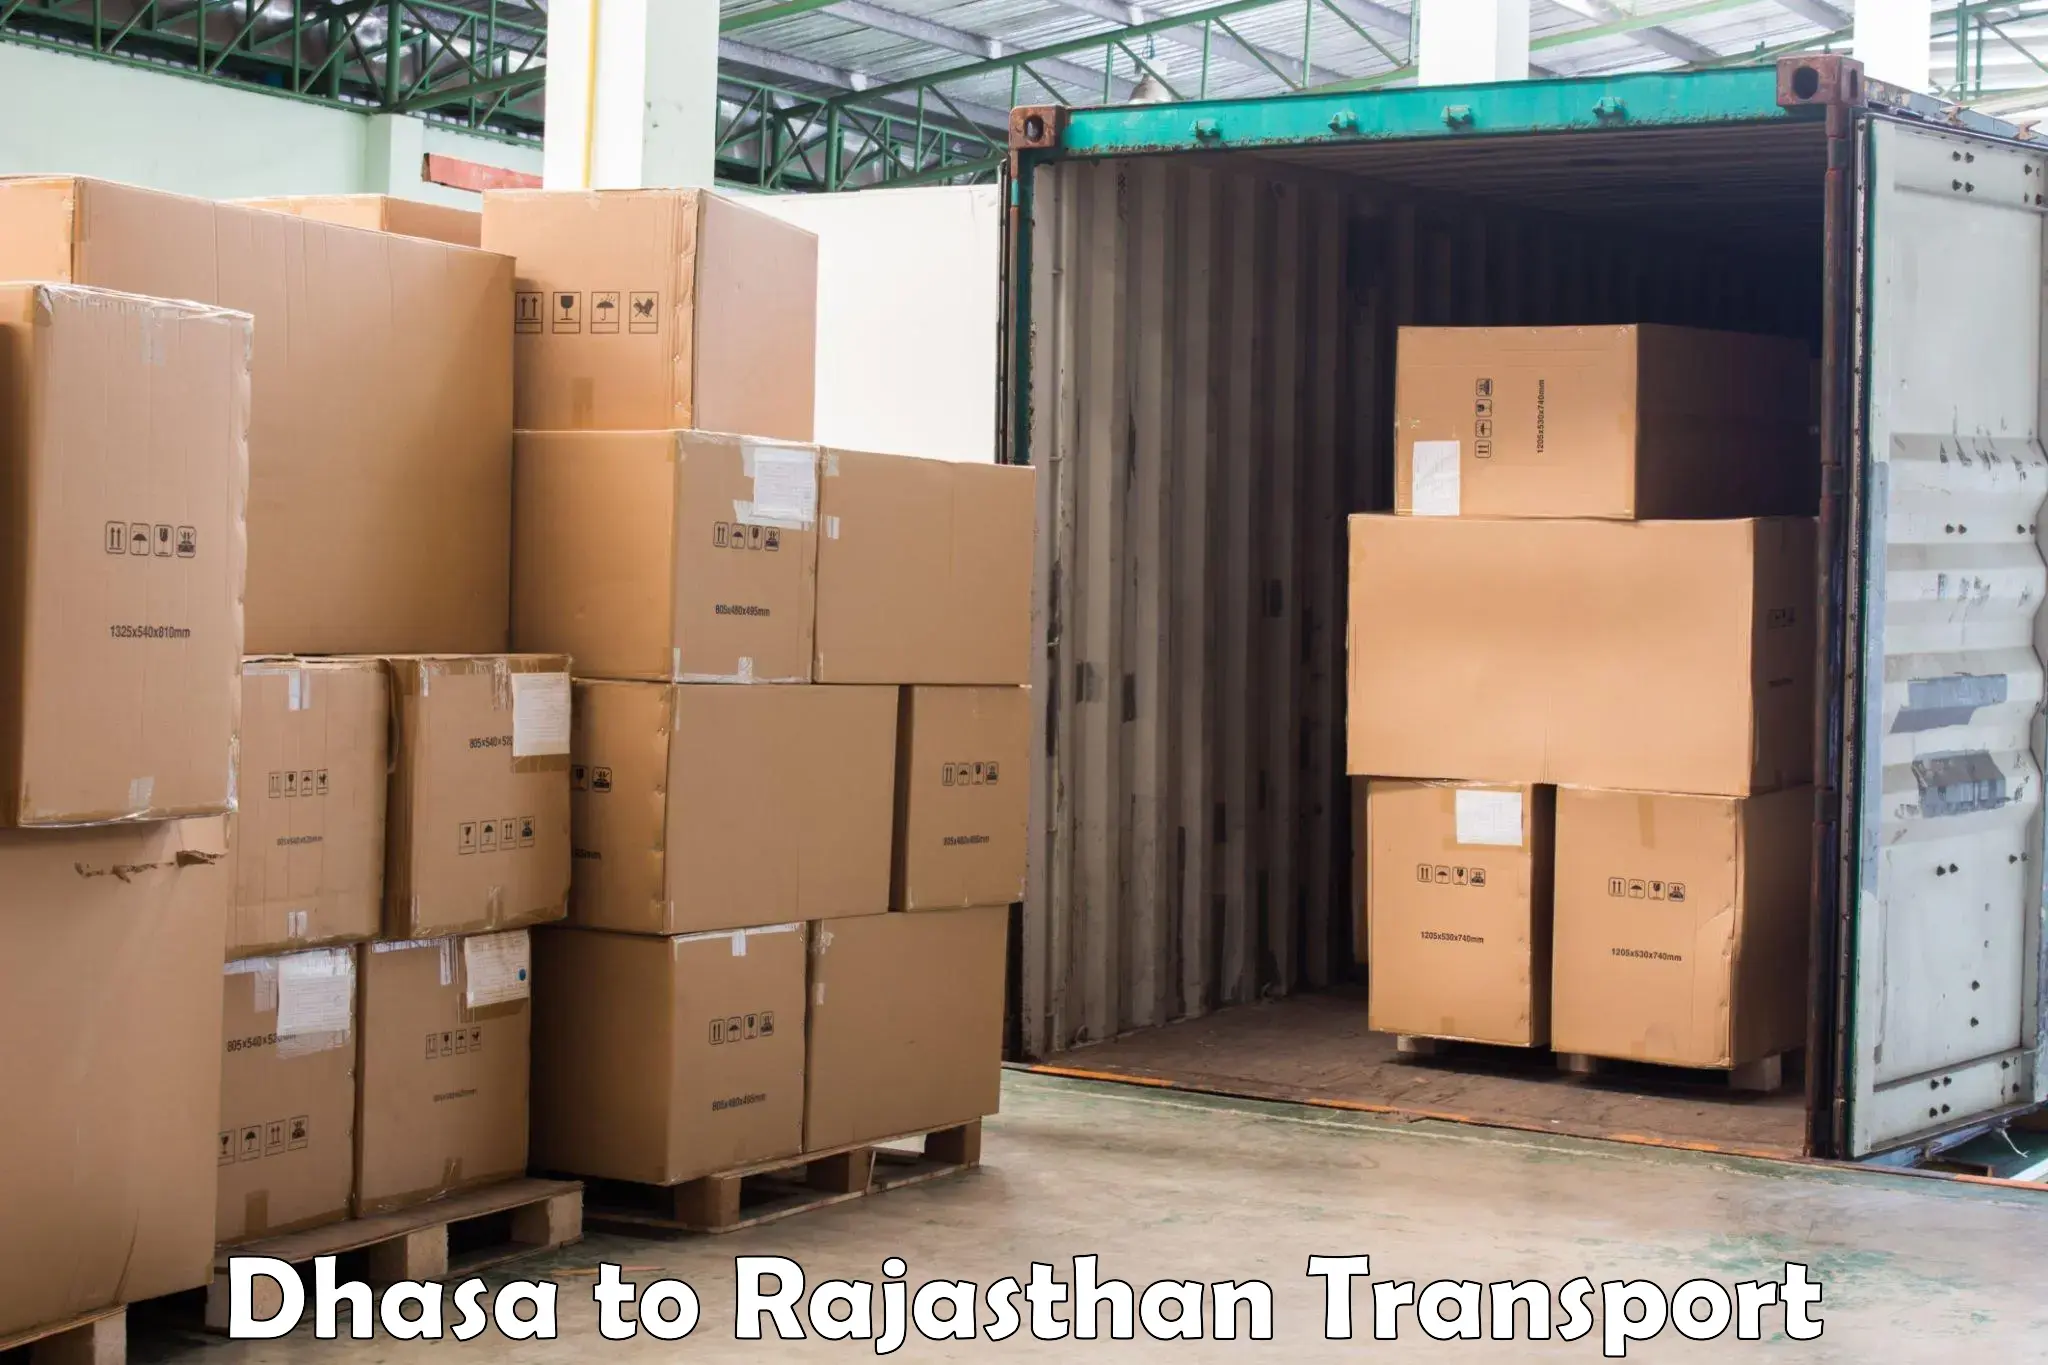 Truck transport companies in India Dhasa to Rajgarh Rajasthan